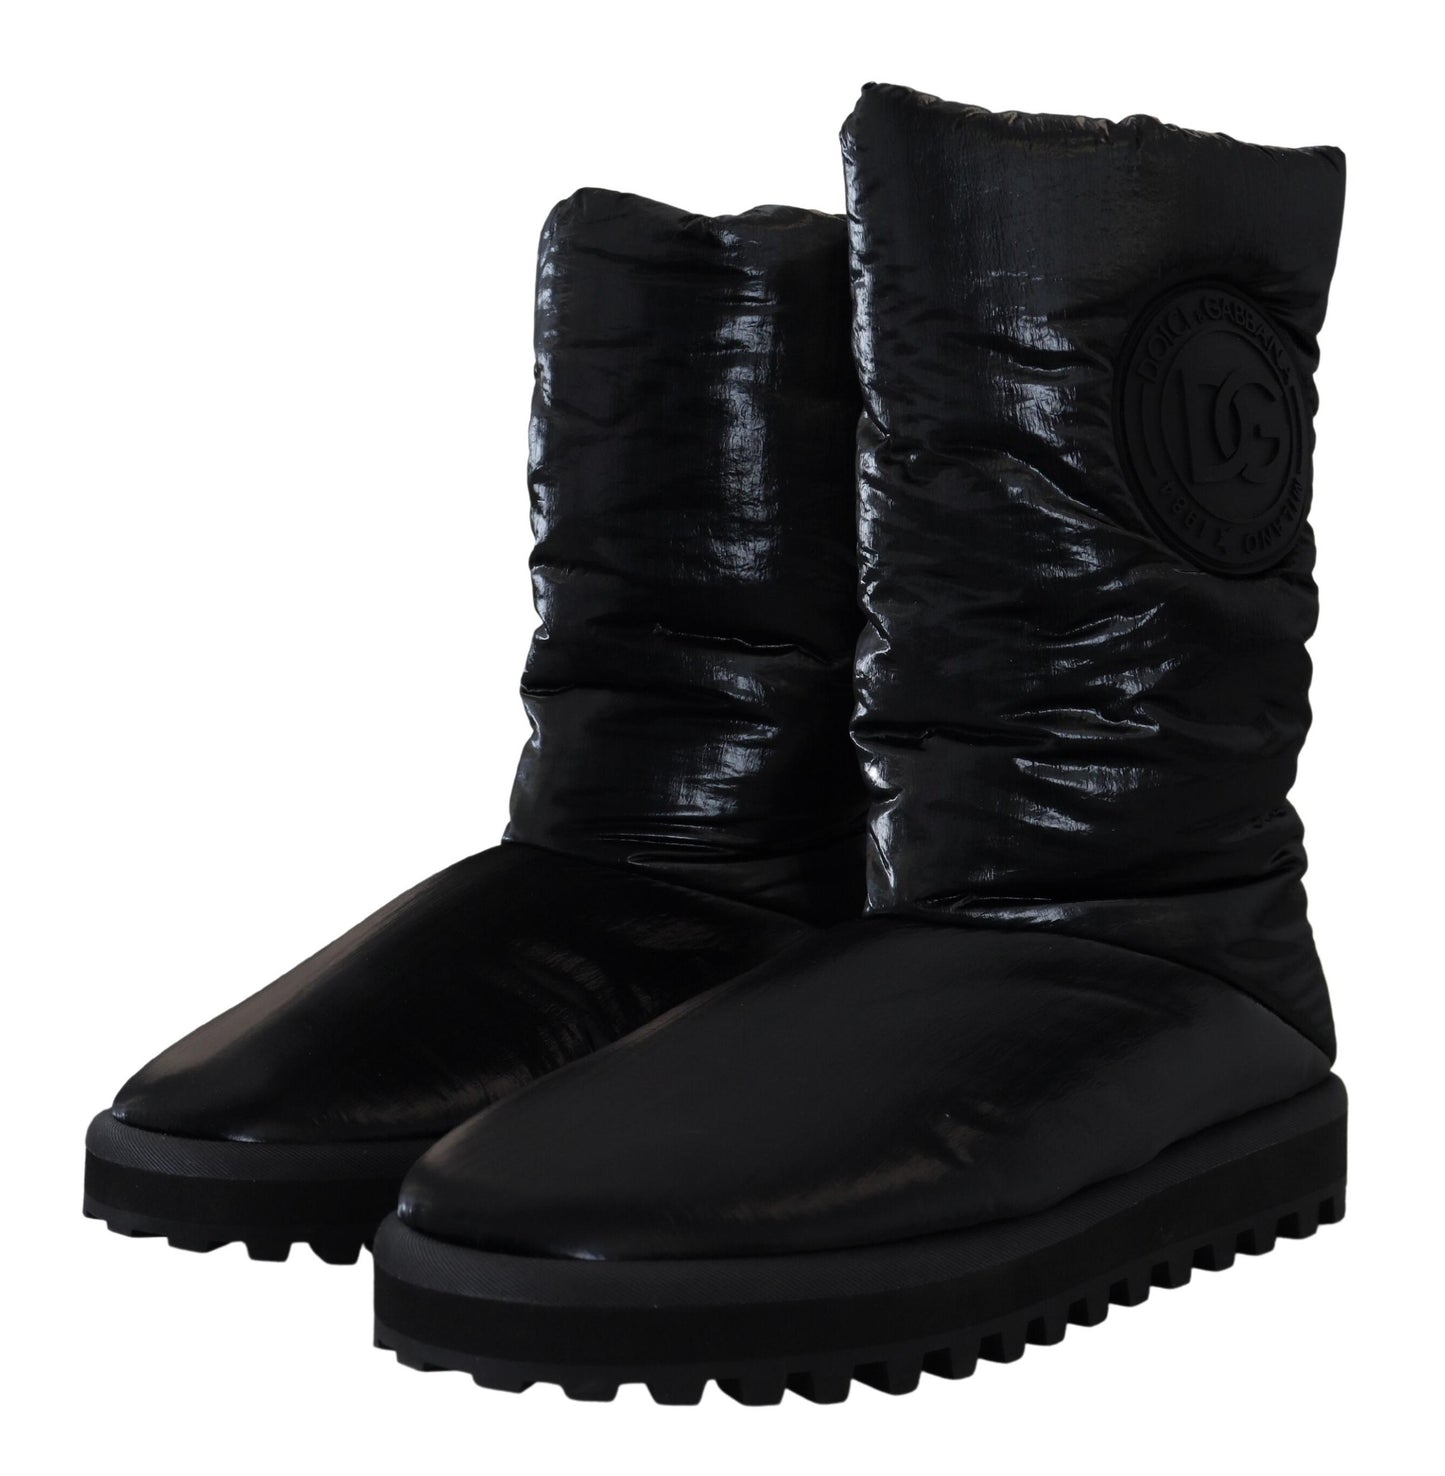 Elegant Mid-Calf Boots in Black Polyester